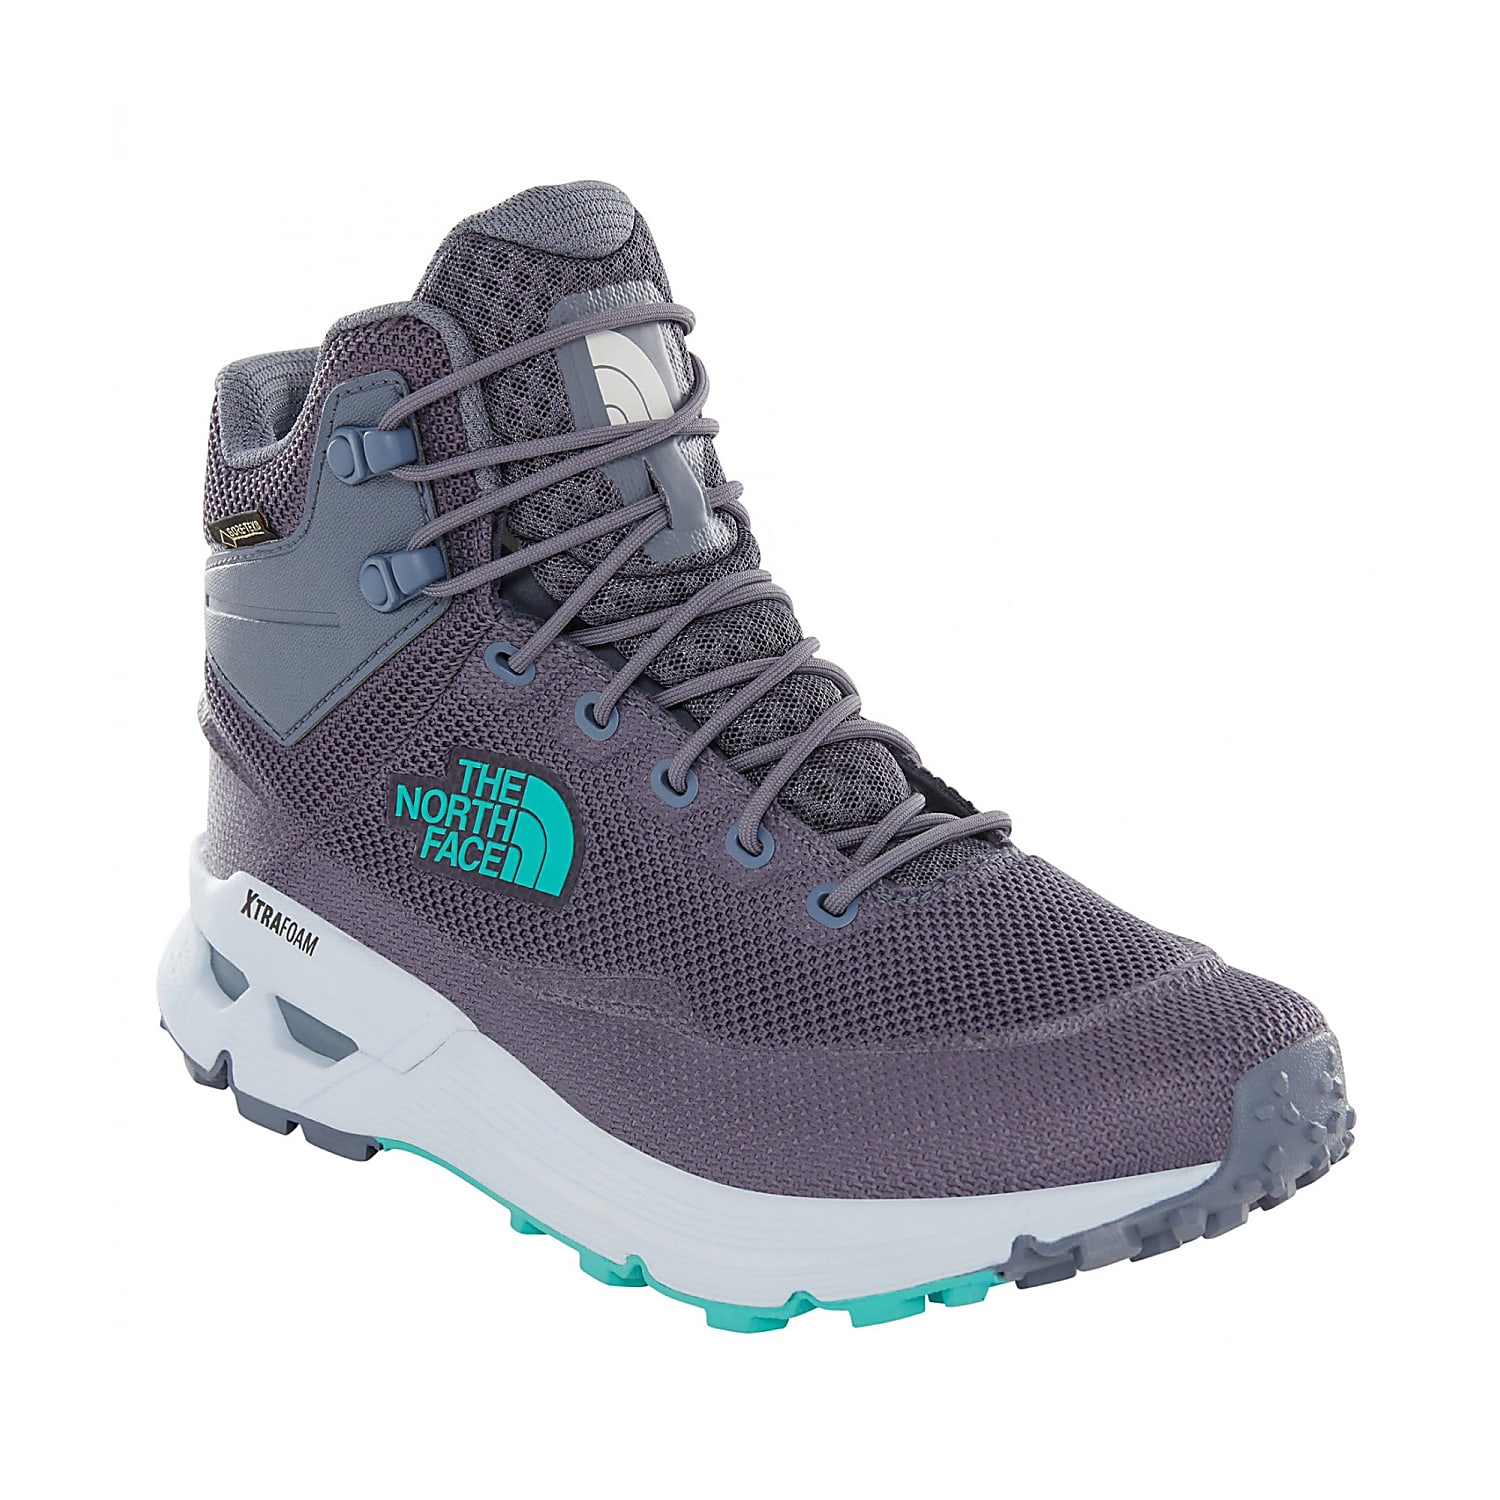 safien mid gtx hiking shoes